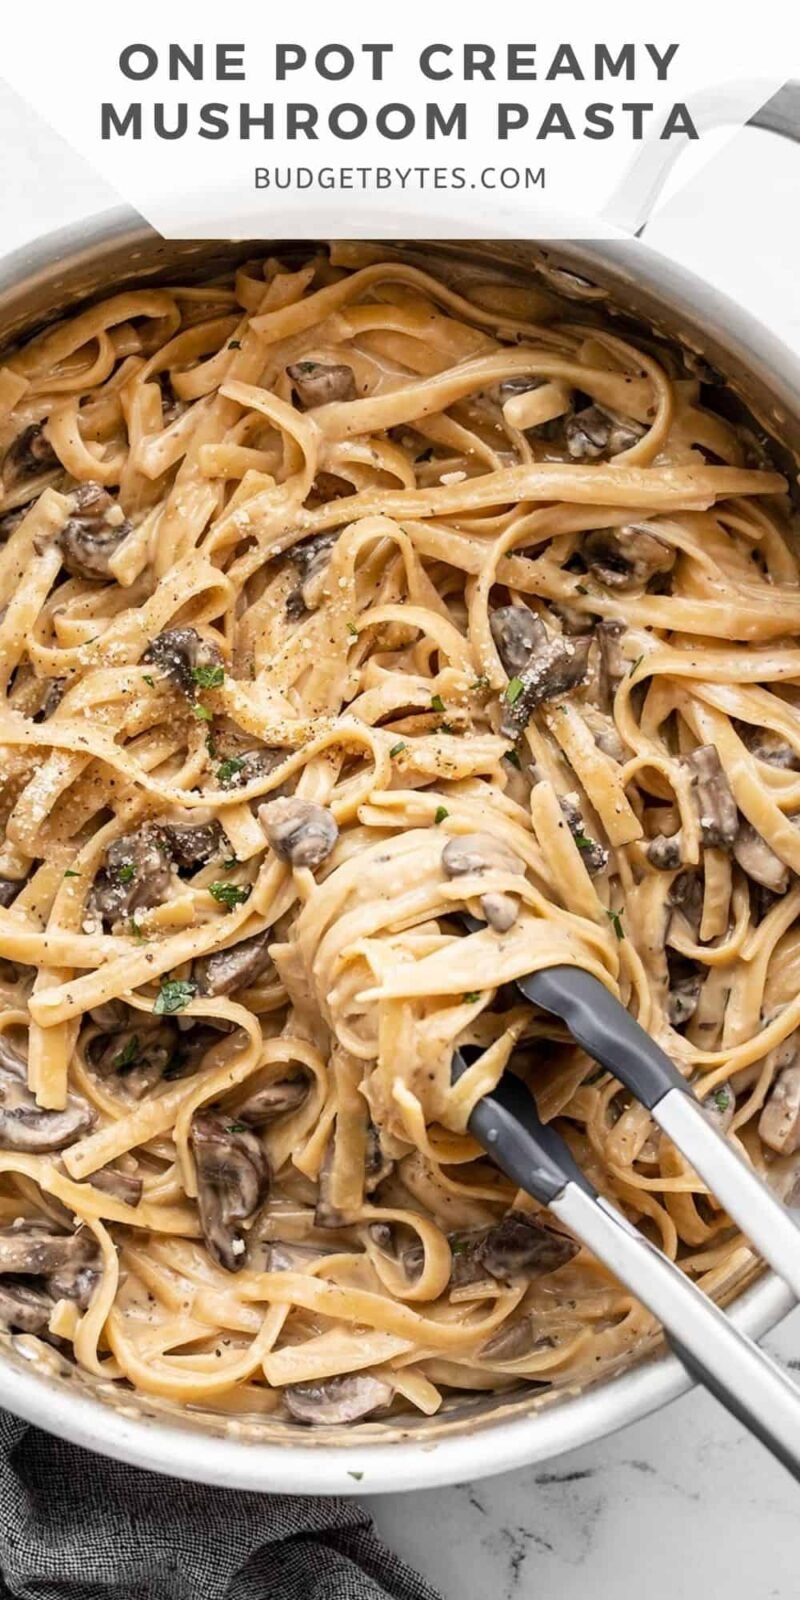 mushroom pasta being twirled around tongs in a skillet, title text at the top